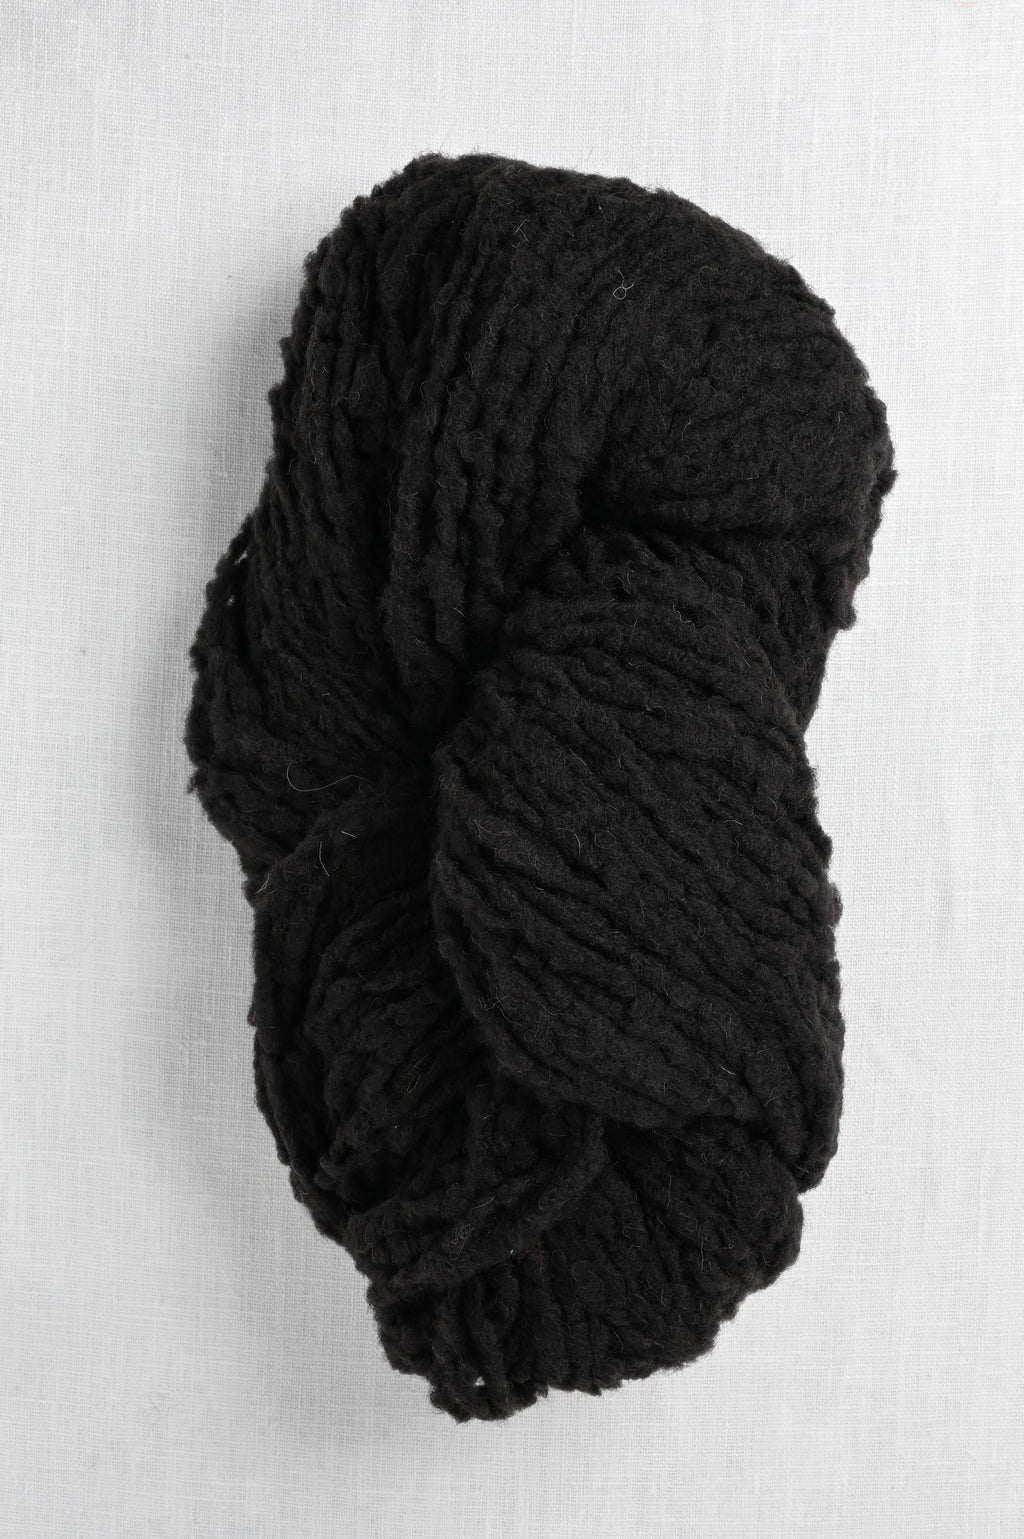 Knit Collage Serenity Carbon